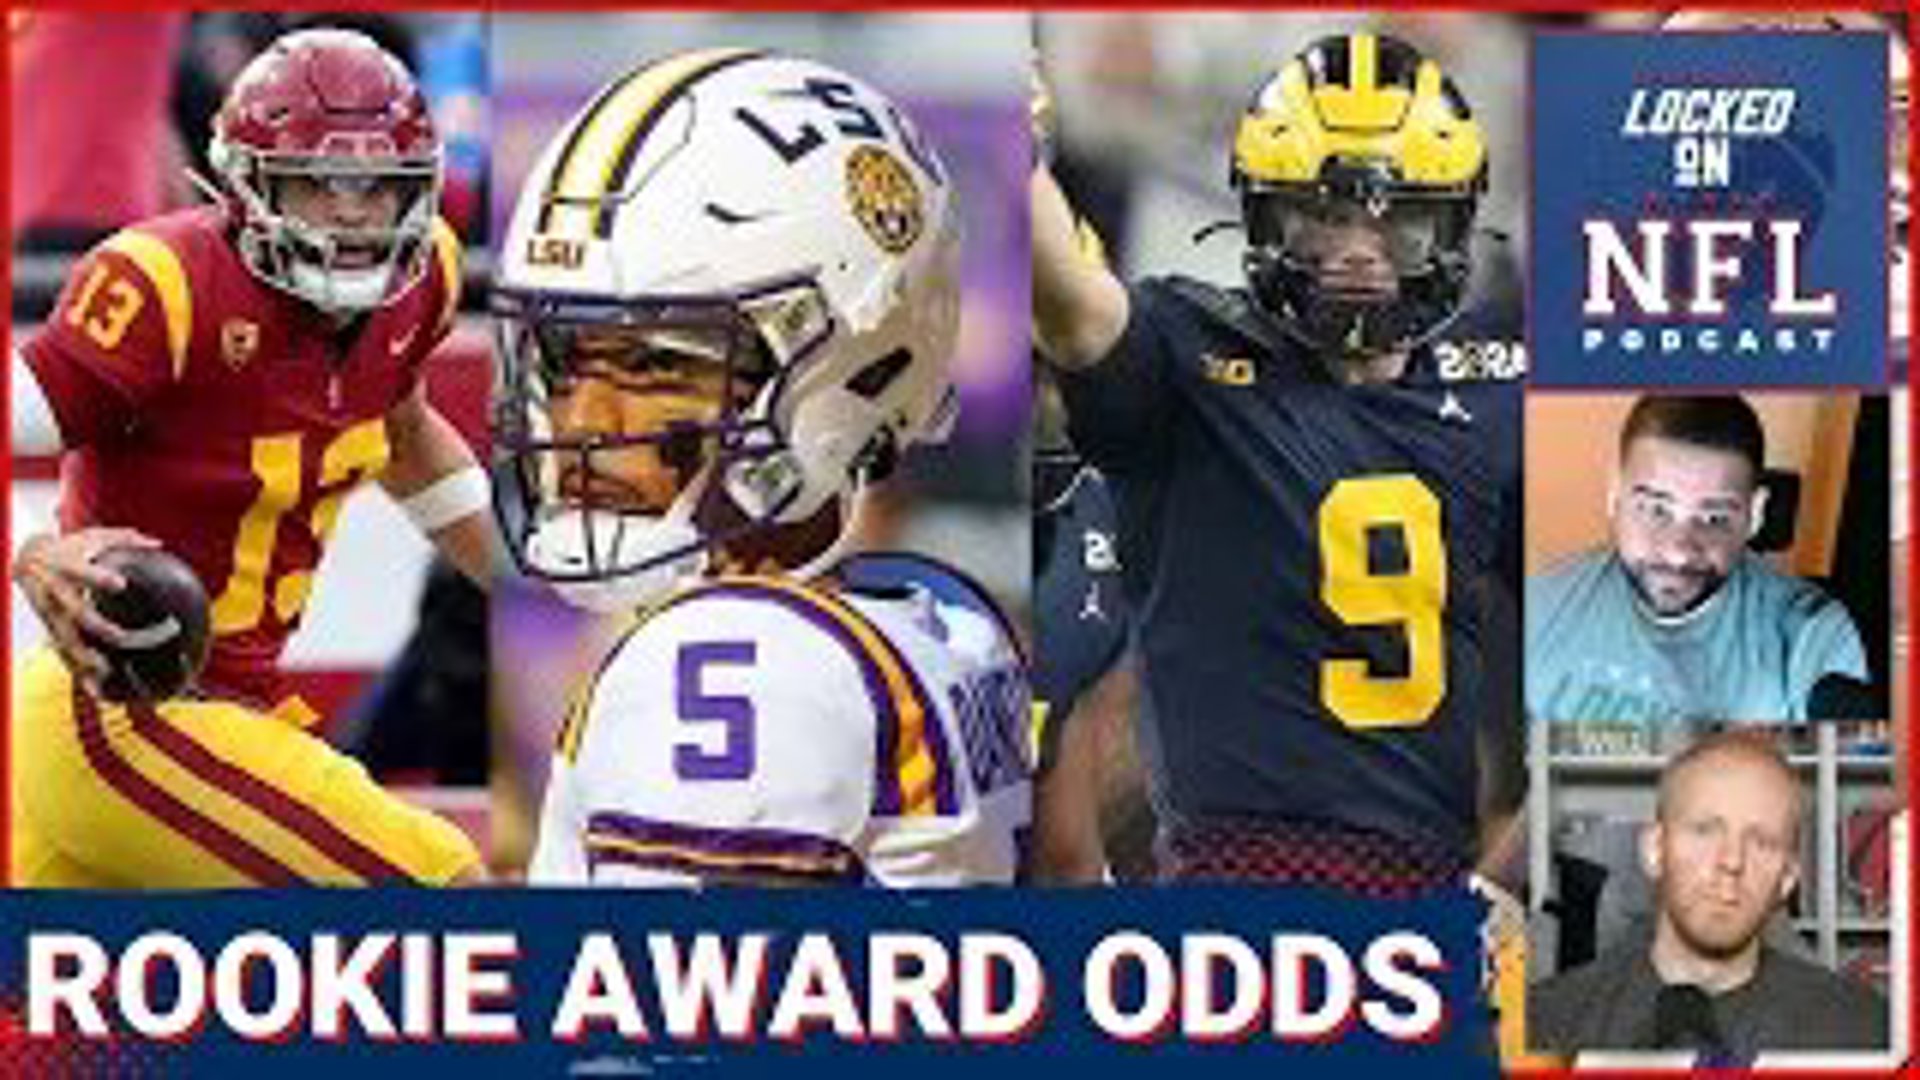 Chris Carter and James Rapien go over all the betting odds for NFL rookie awards and see who has the best odds to bet on before the season begins.